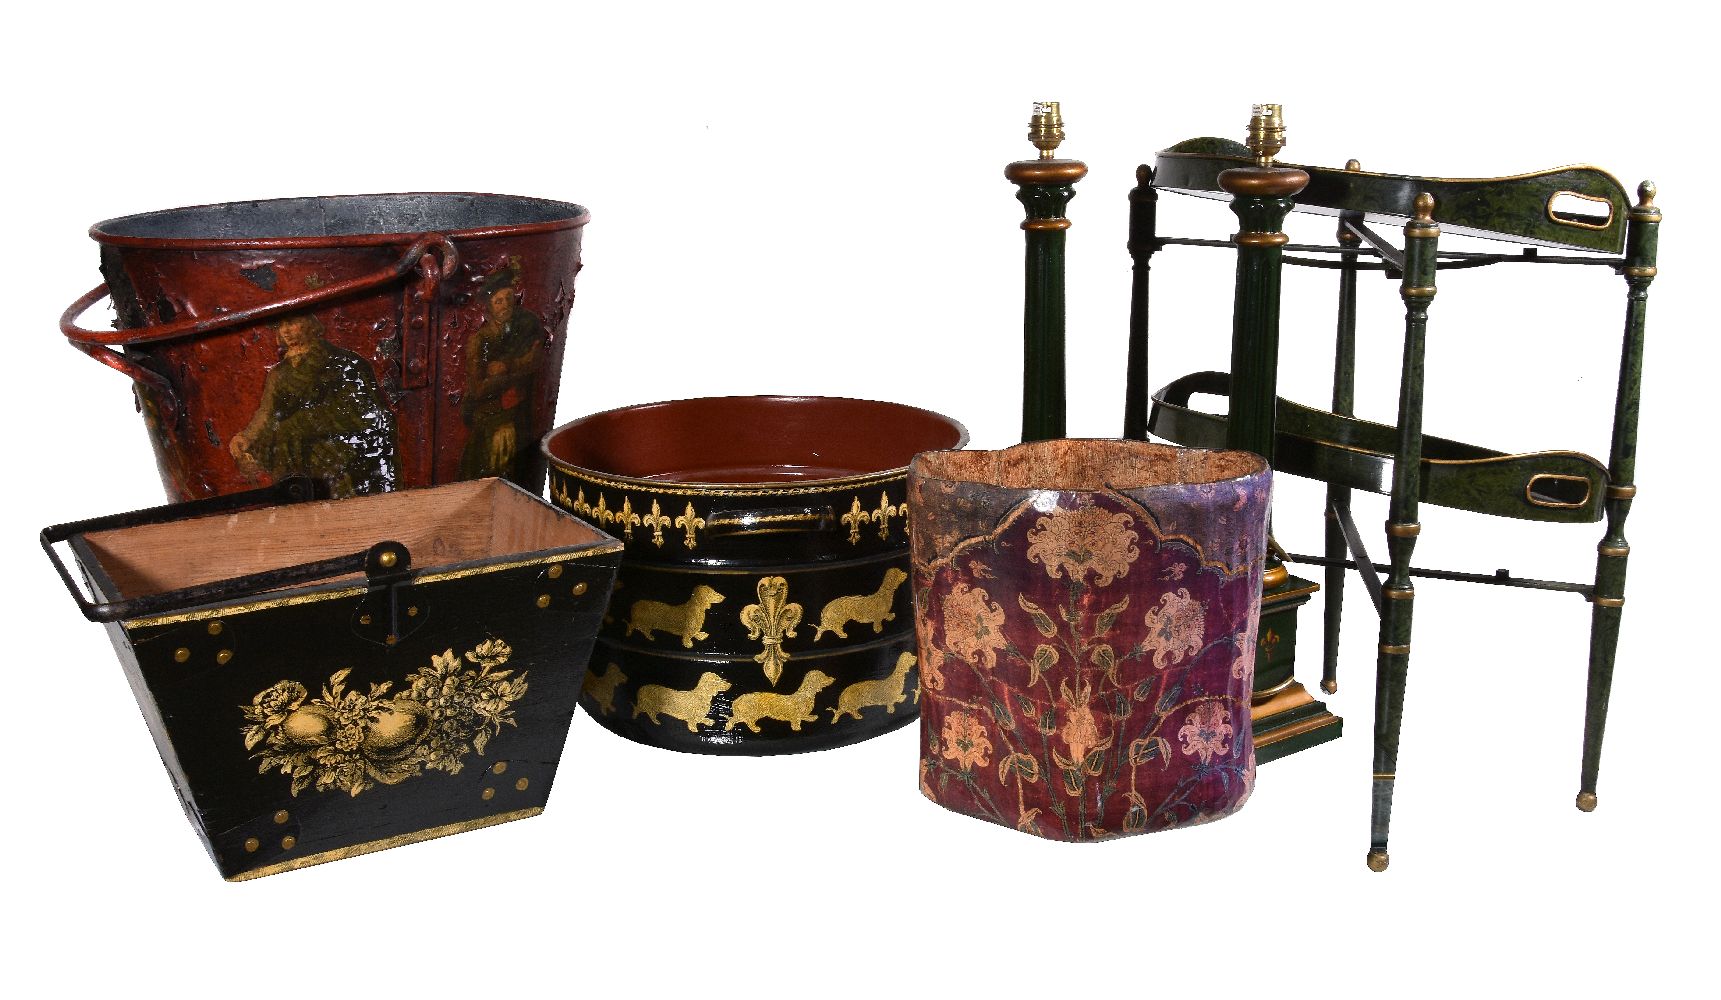 A collection of japanned tolewares, including a large bucket with later decoupage decoration, late